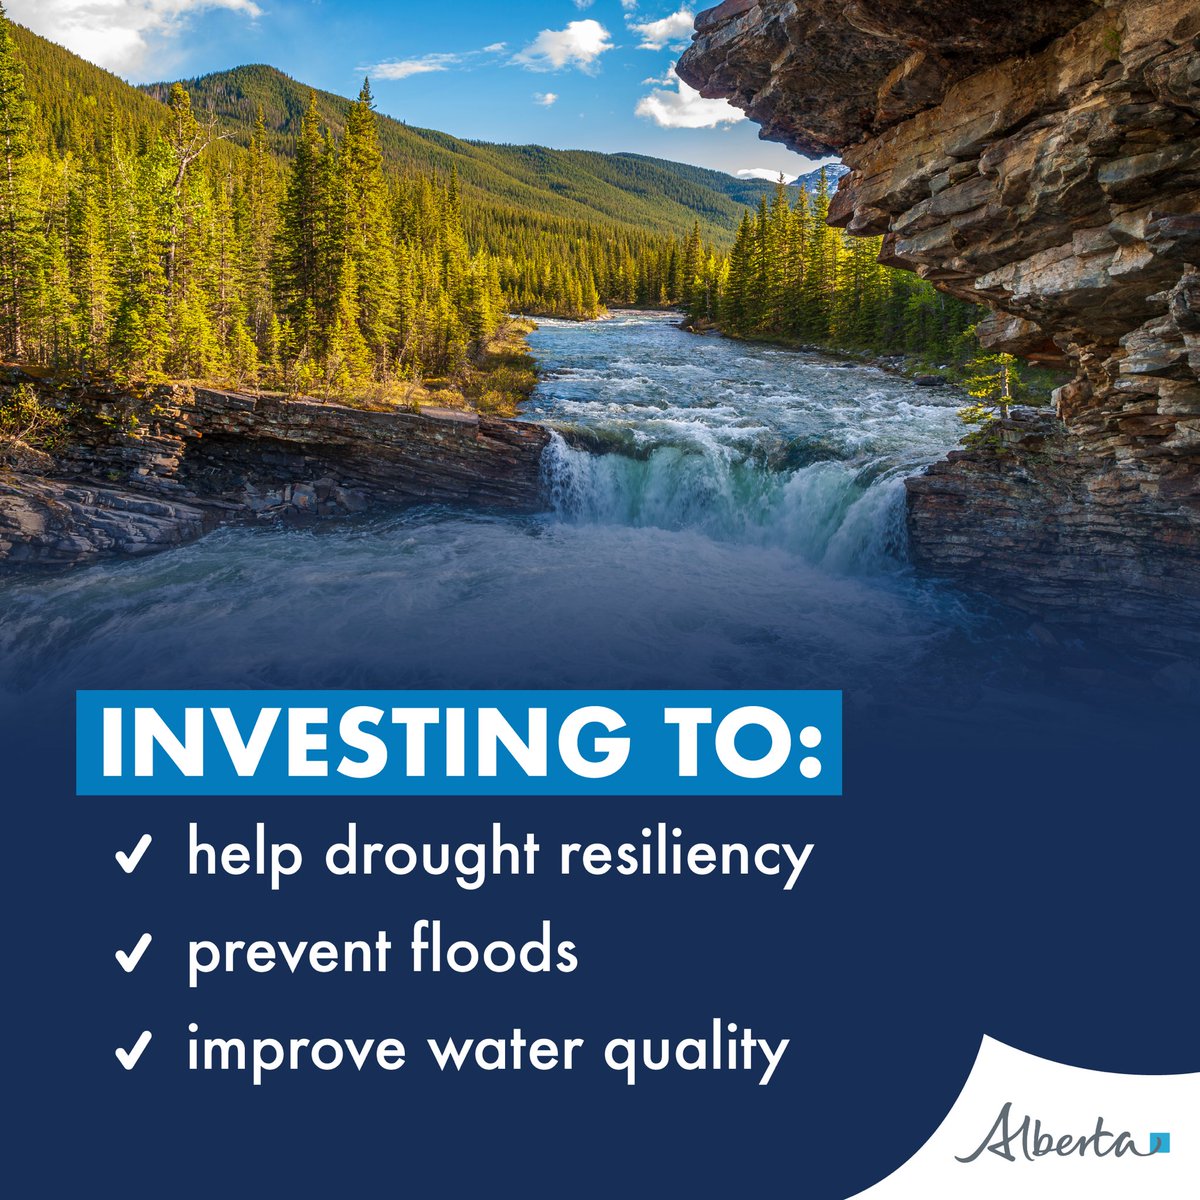 Alberta is investing to help the province be more naturally drought resilient, prevent floods, and improve water quality. By working with local communities and partners, we are helping mitigate the impacts of future floods & droughts in communities across the province.